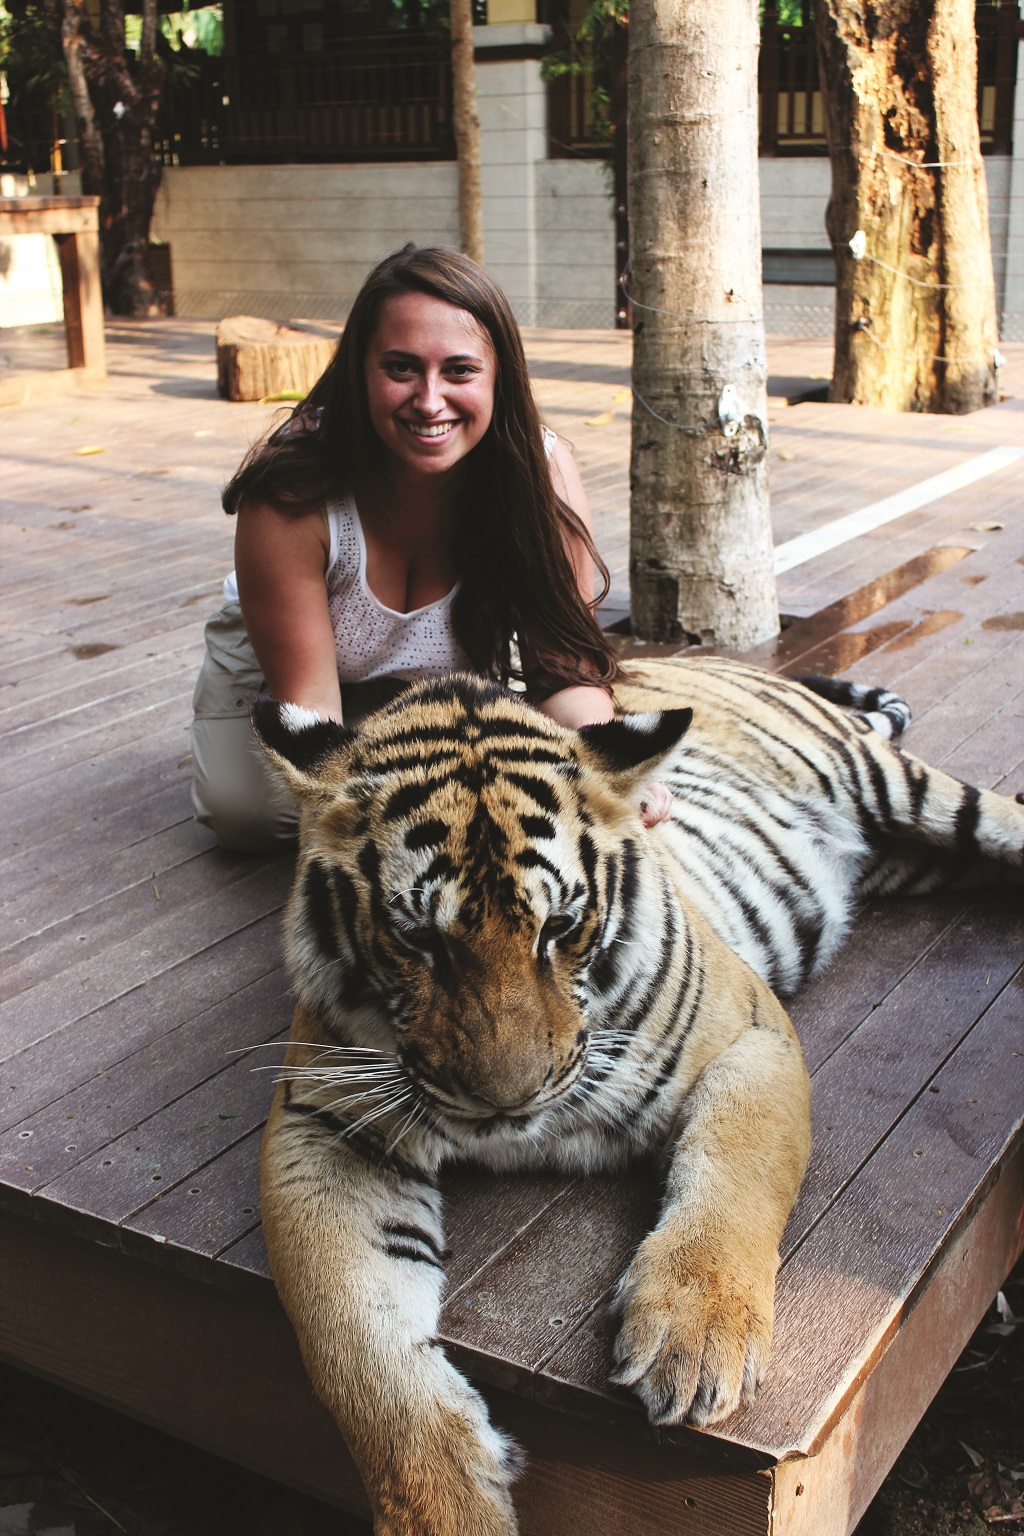 Foreign Study at K Sparks Alumna’s Passion for Travel